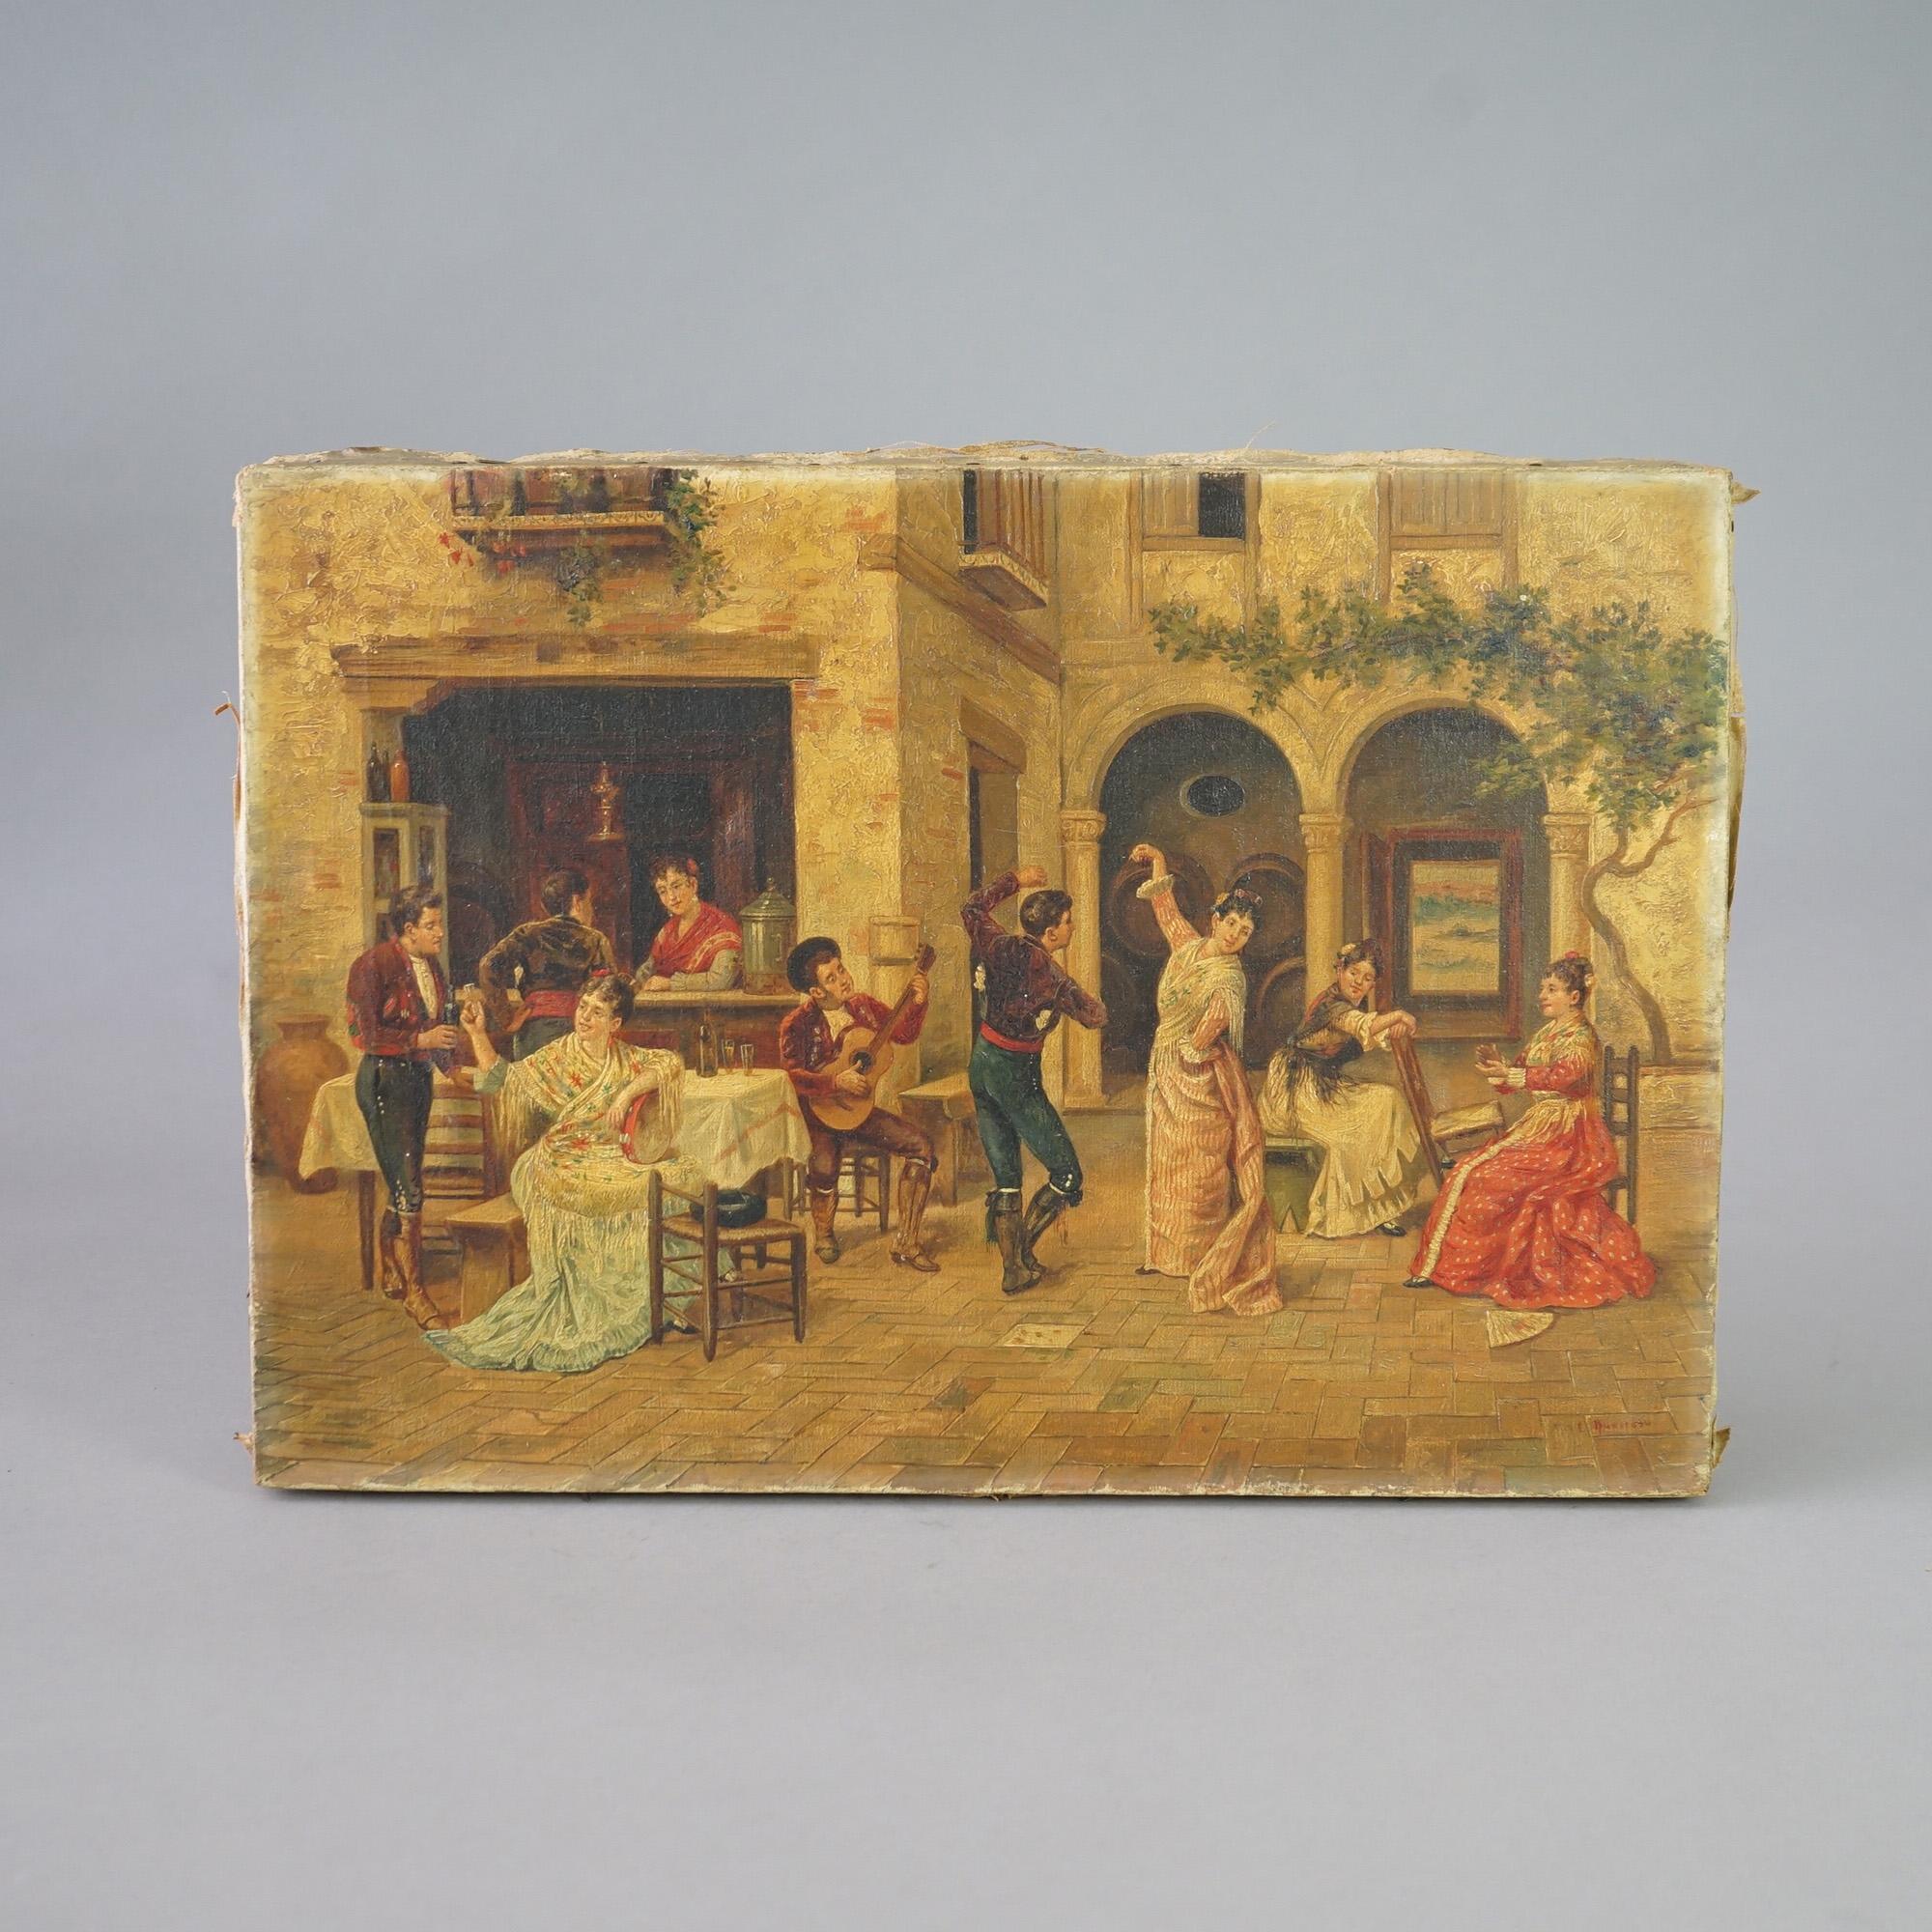 An antique painting offers oil on canvas Spanish genre scene with figures dancing in a courtyard, c1920

Measures - 14.5